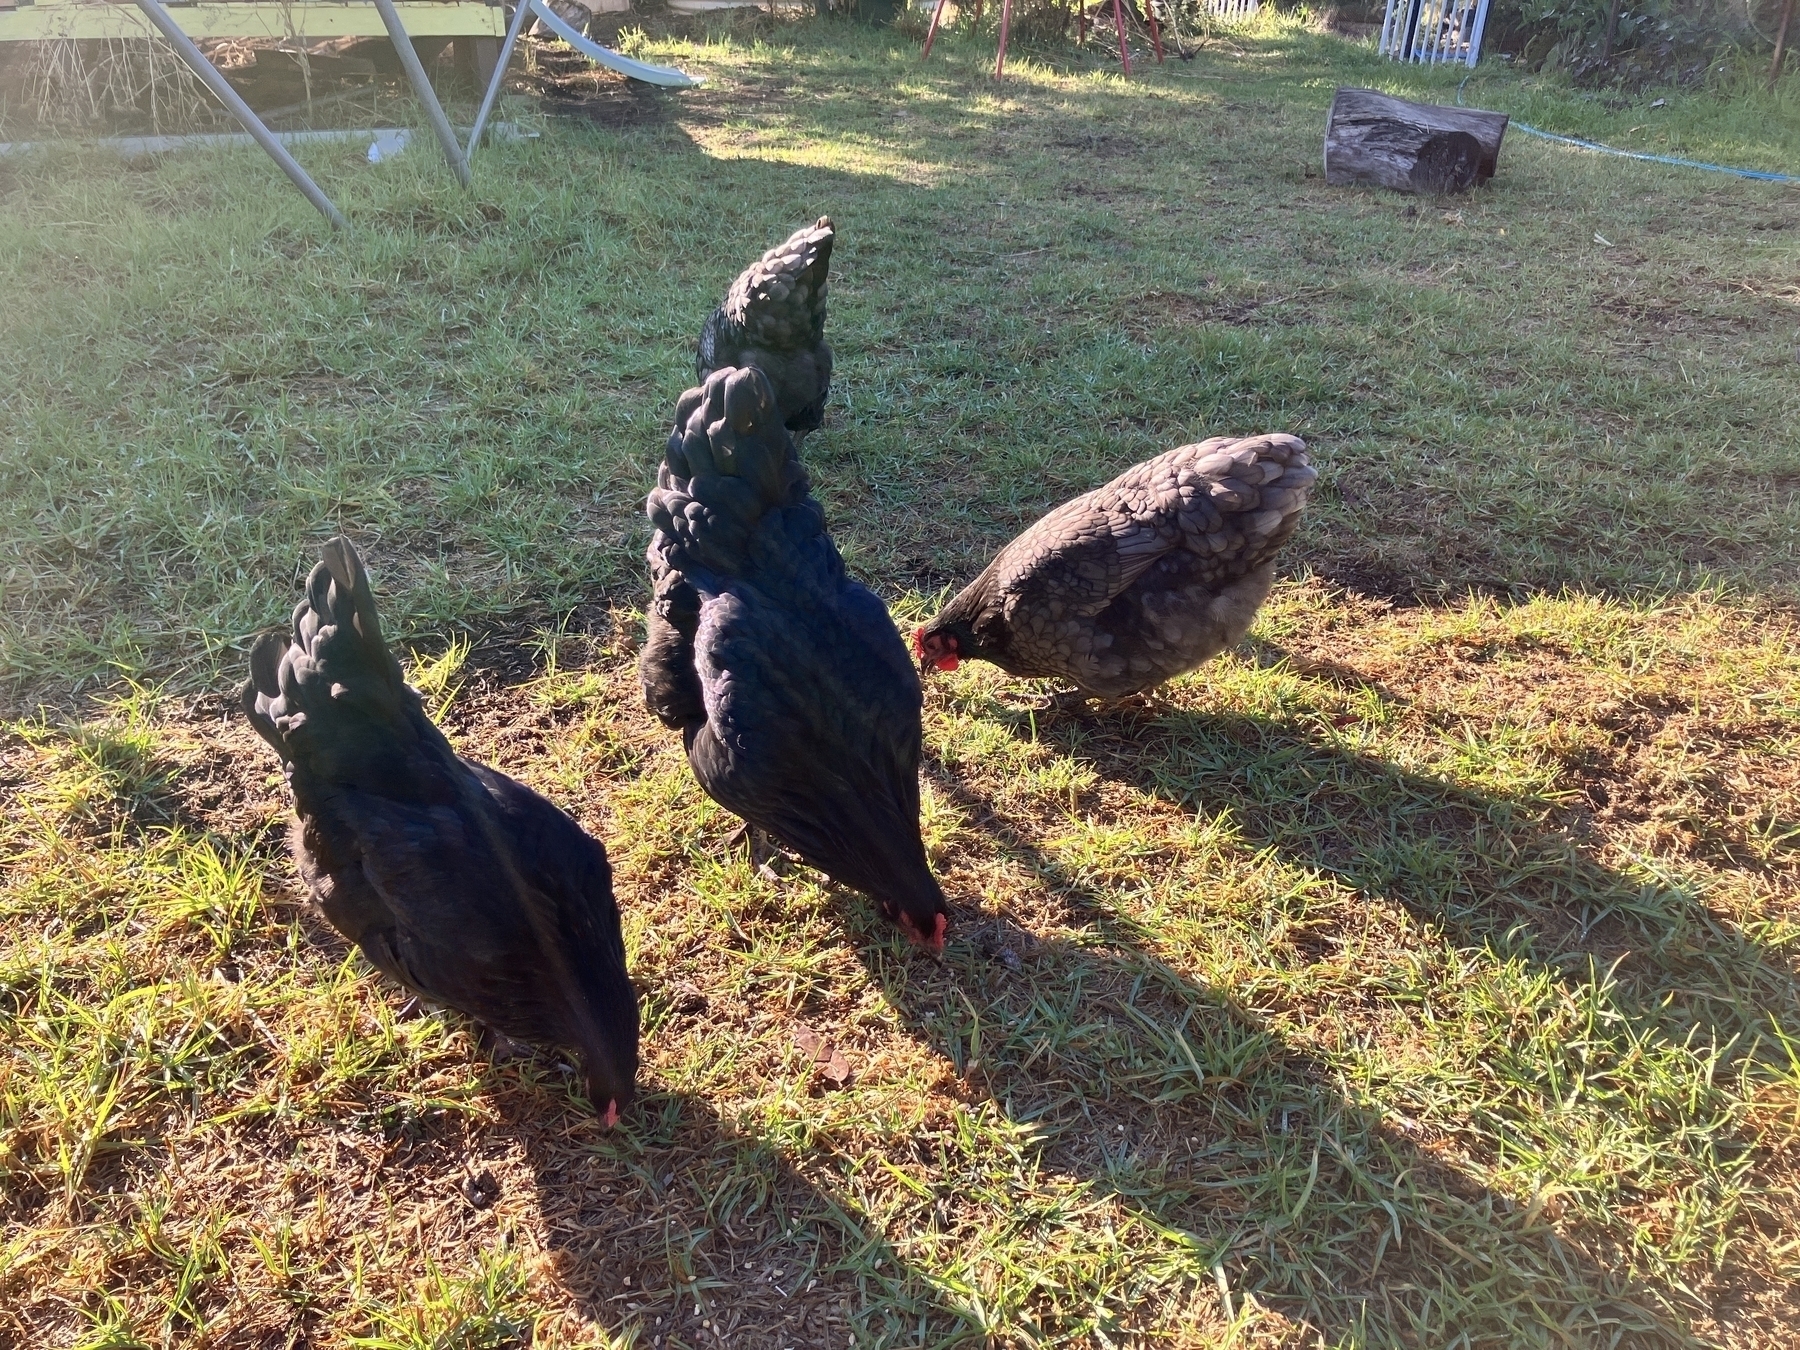 Four large black chickens are pecking at grain on a sunny lawn.